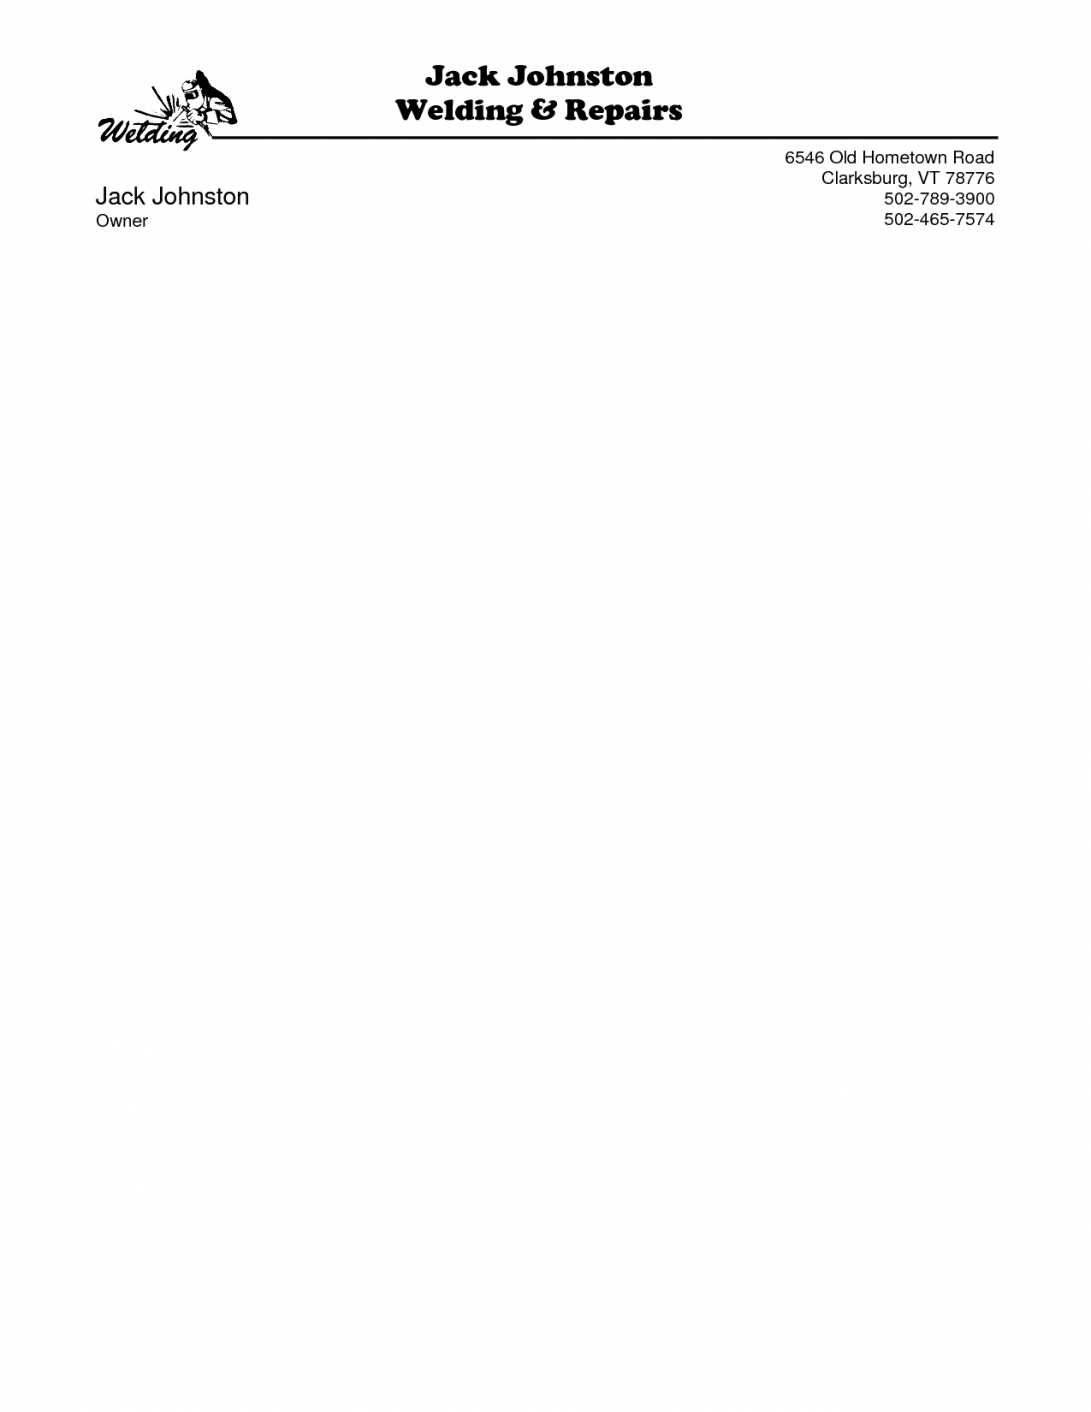 019 Business Letterhead Word Format Free Download Company With Free Construction Company Letterhead Templates